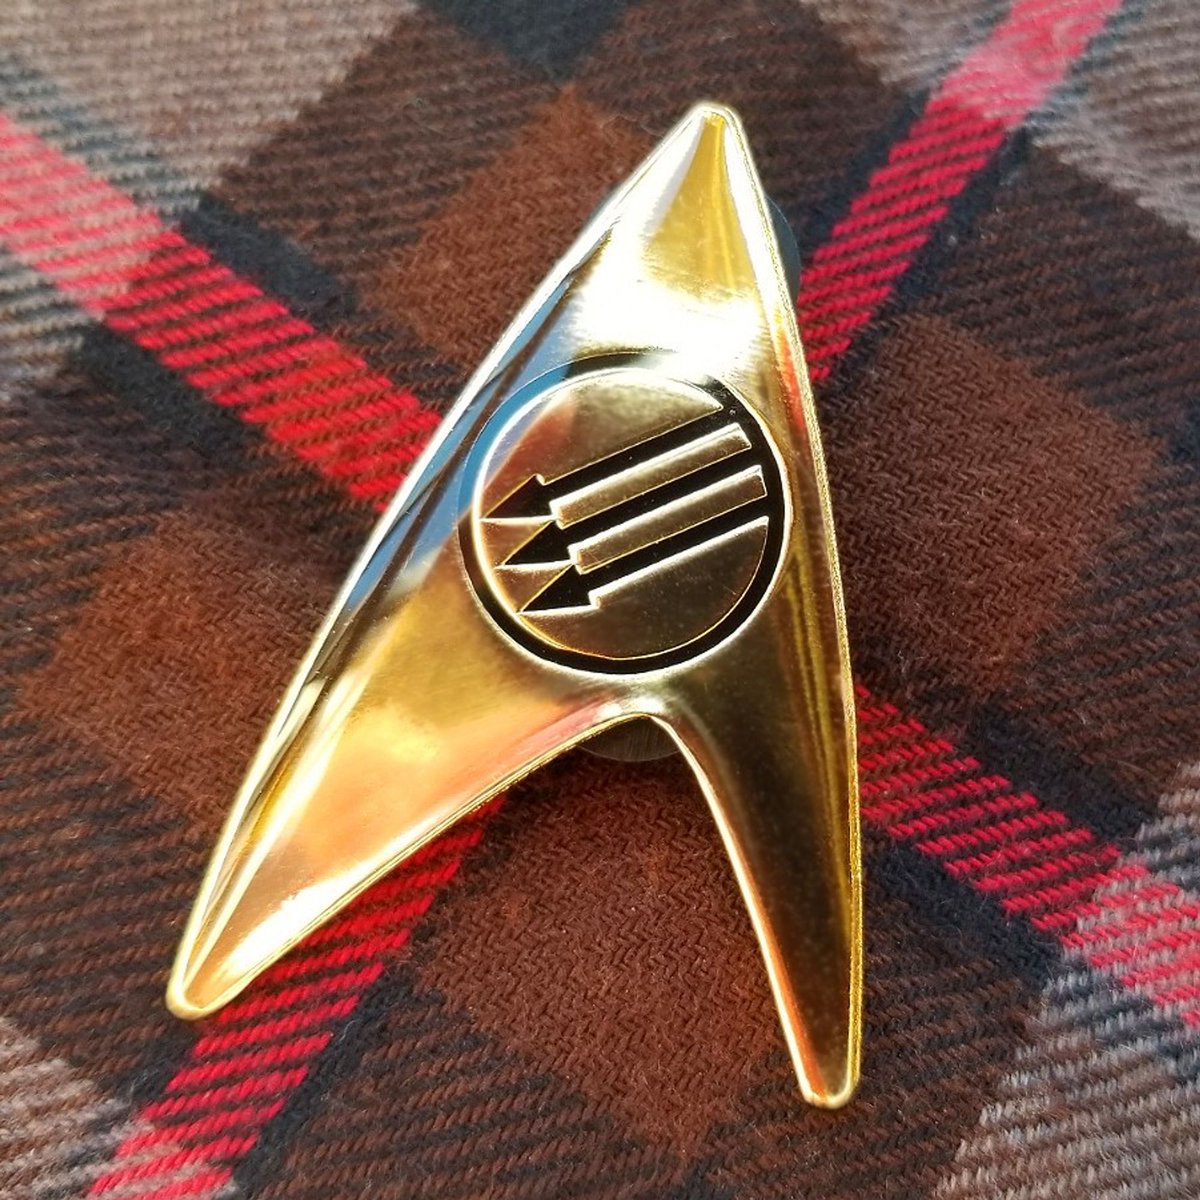 PIN RESTOCK ALERT! Bajor-Palestine double flags and Antifa Starfleet insignia pins are back! The first batch of flag pins sold out faster than anything I've ever put in my shop. All proceeds for those go to the Palestinian Children's Relief Fund. willburrows.art/shop